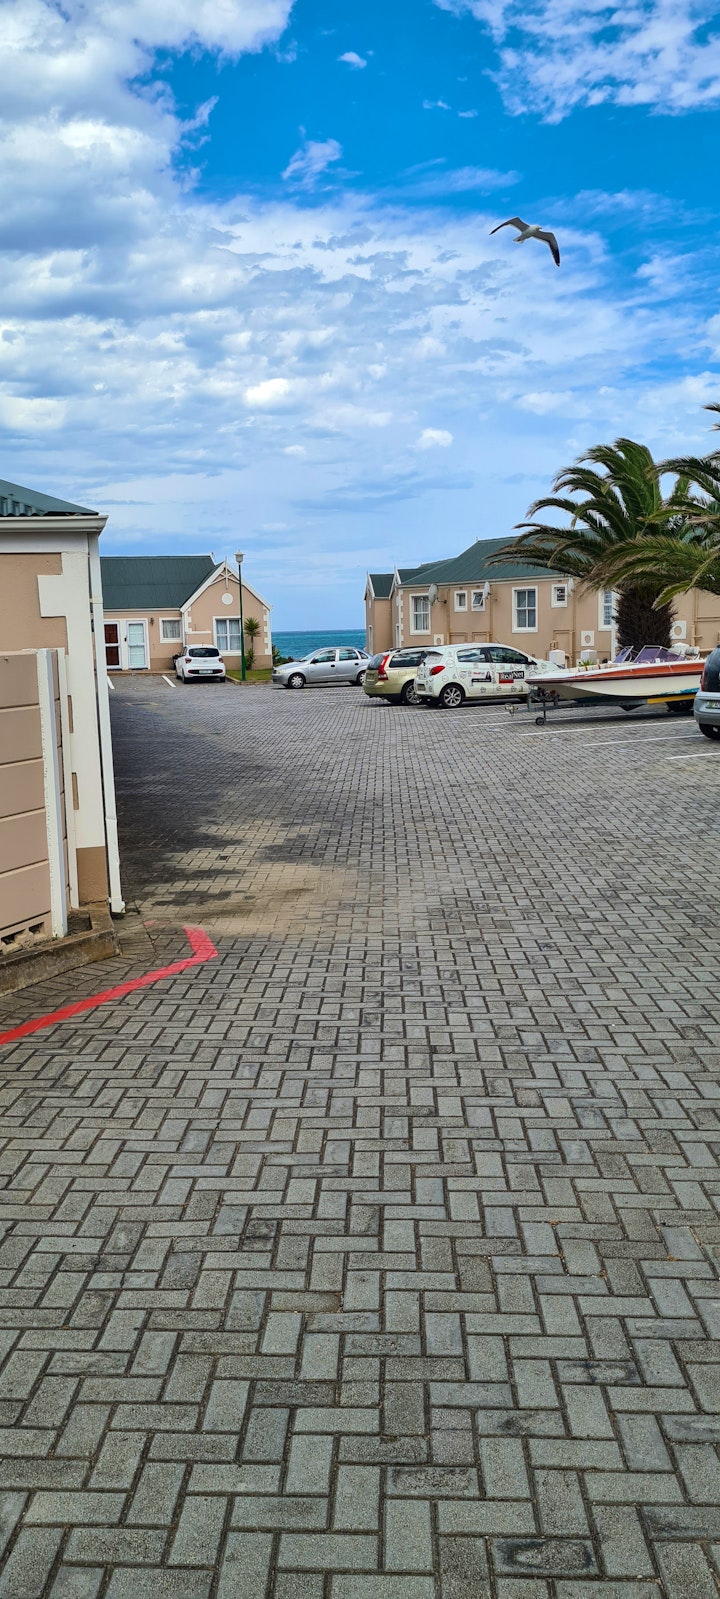 Eastern Cape Accommodation at 17 Claptons | Viya